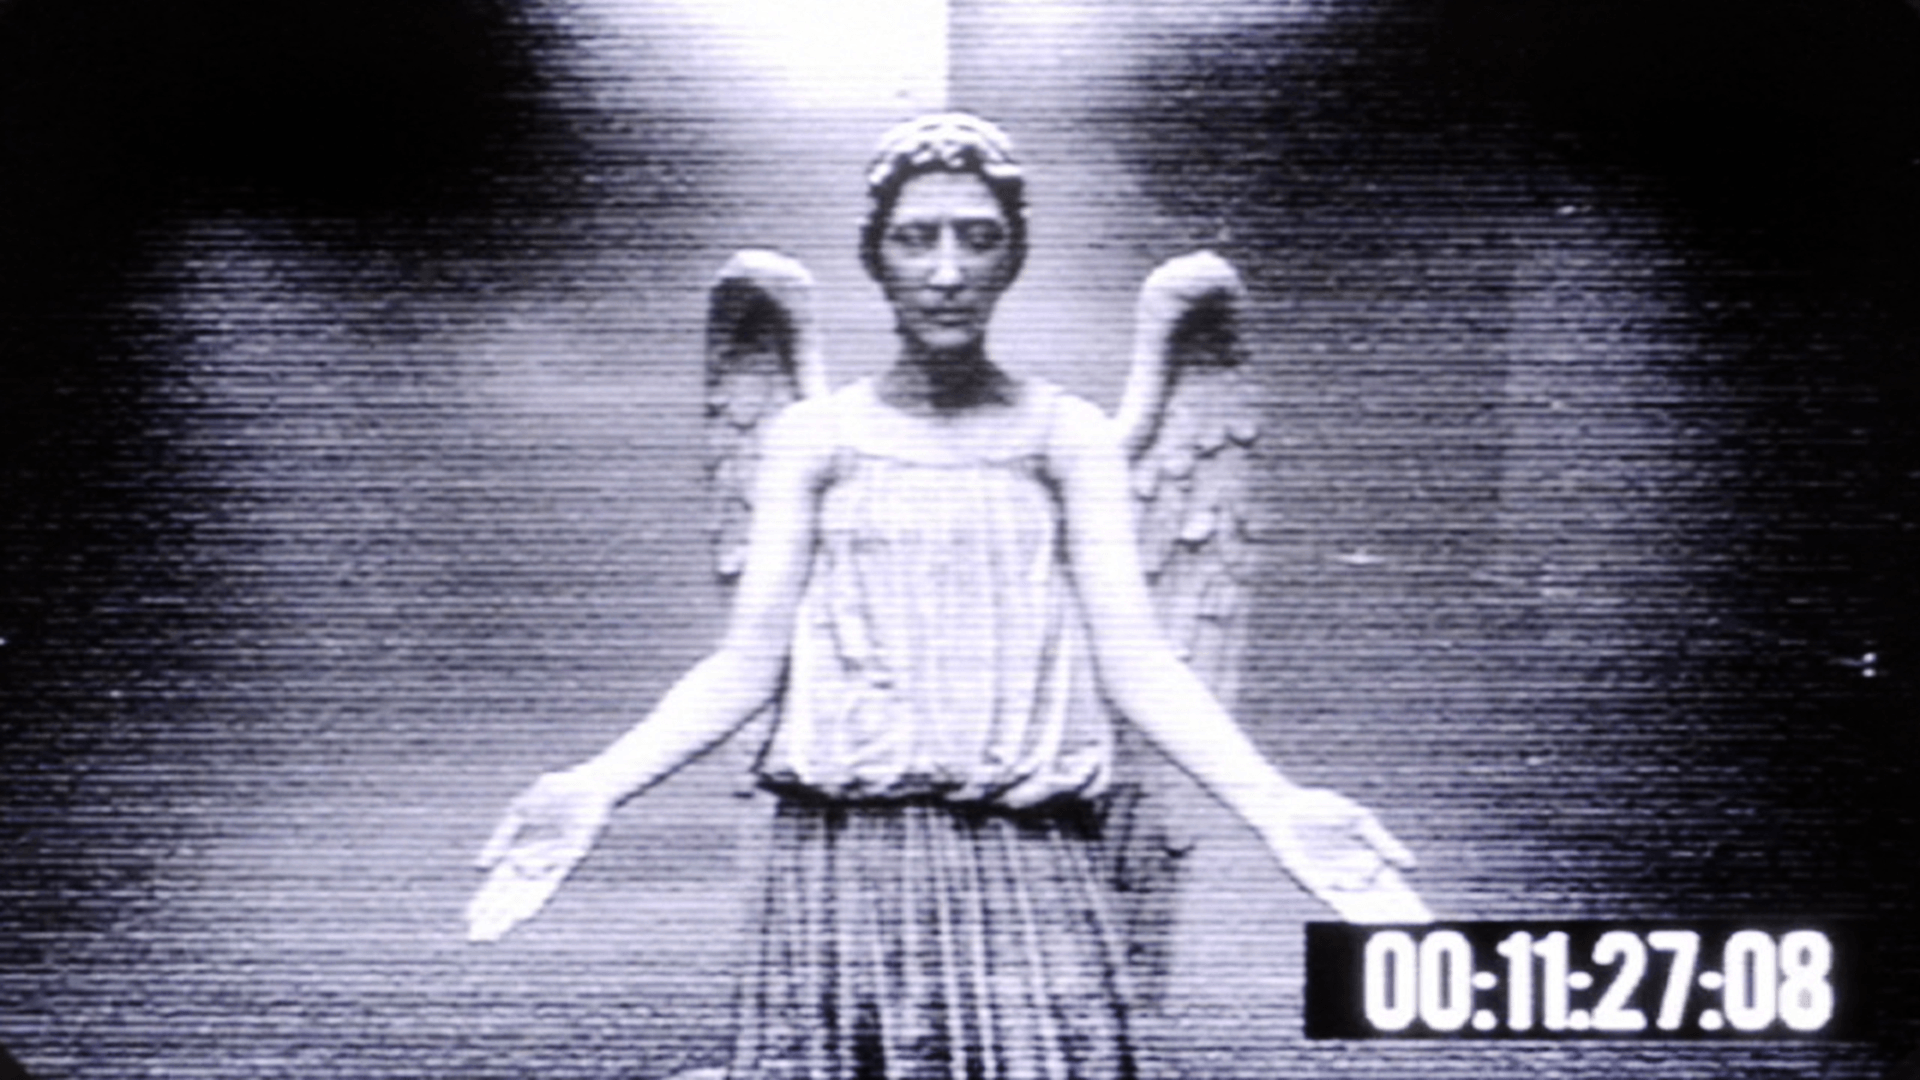 Weeping Angels wallpaper. Set it to change every few seconds